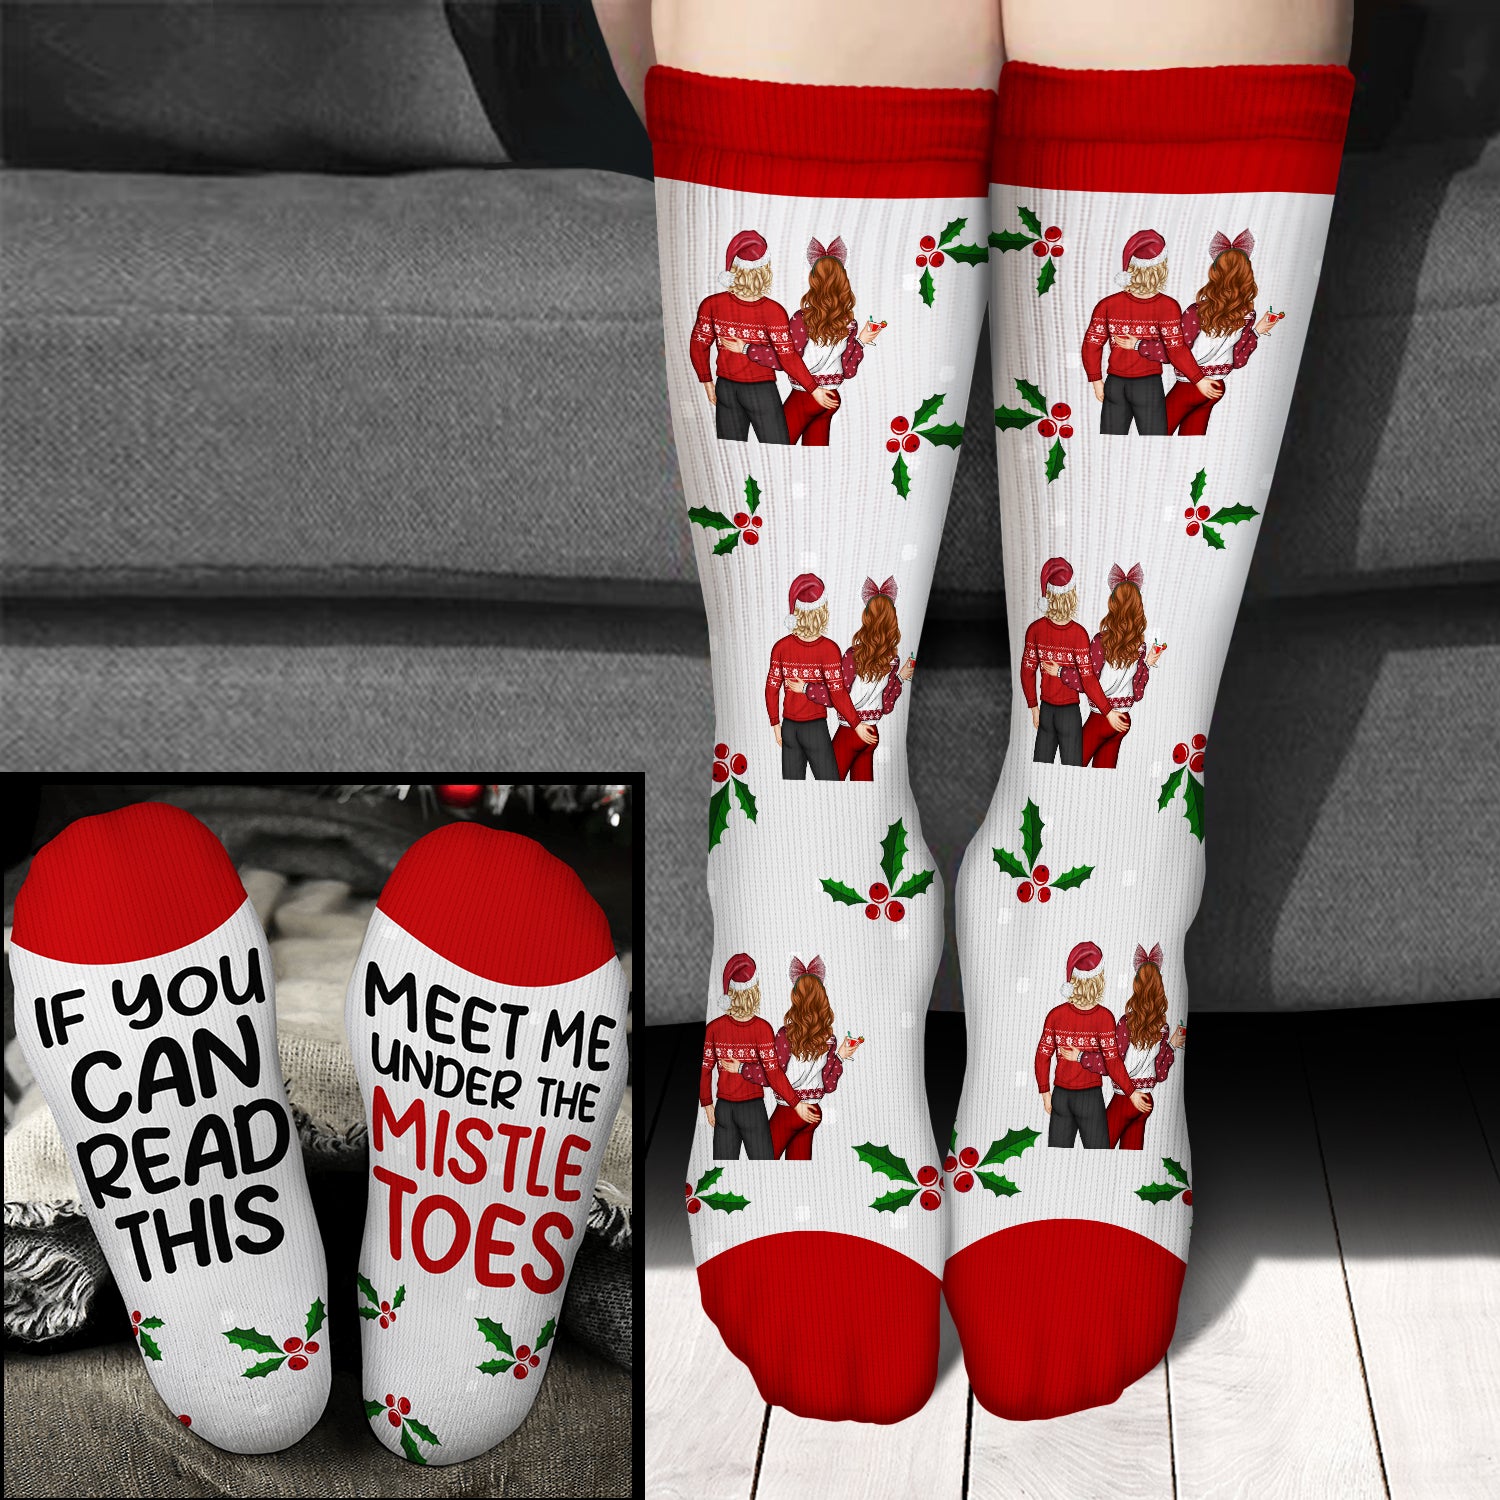 Under The Mistletoes - Christmas Gift For Couples - Personalized Socks